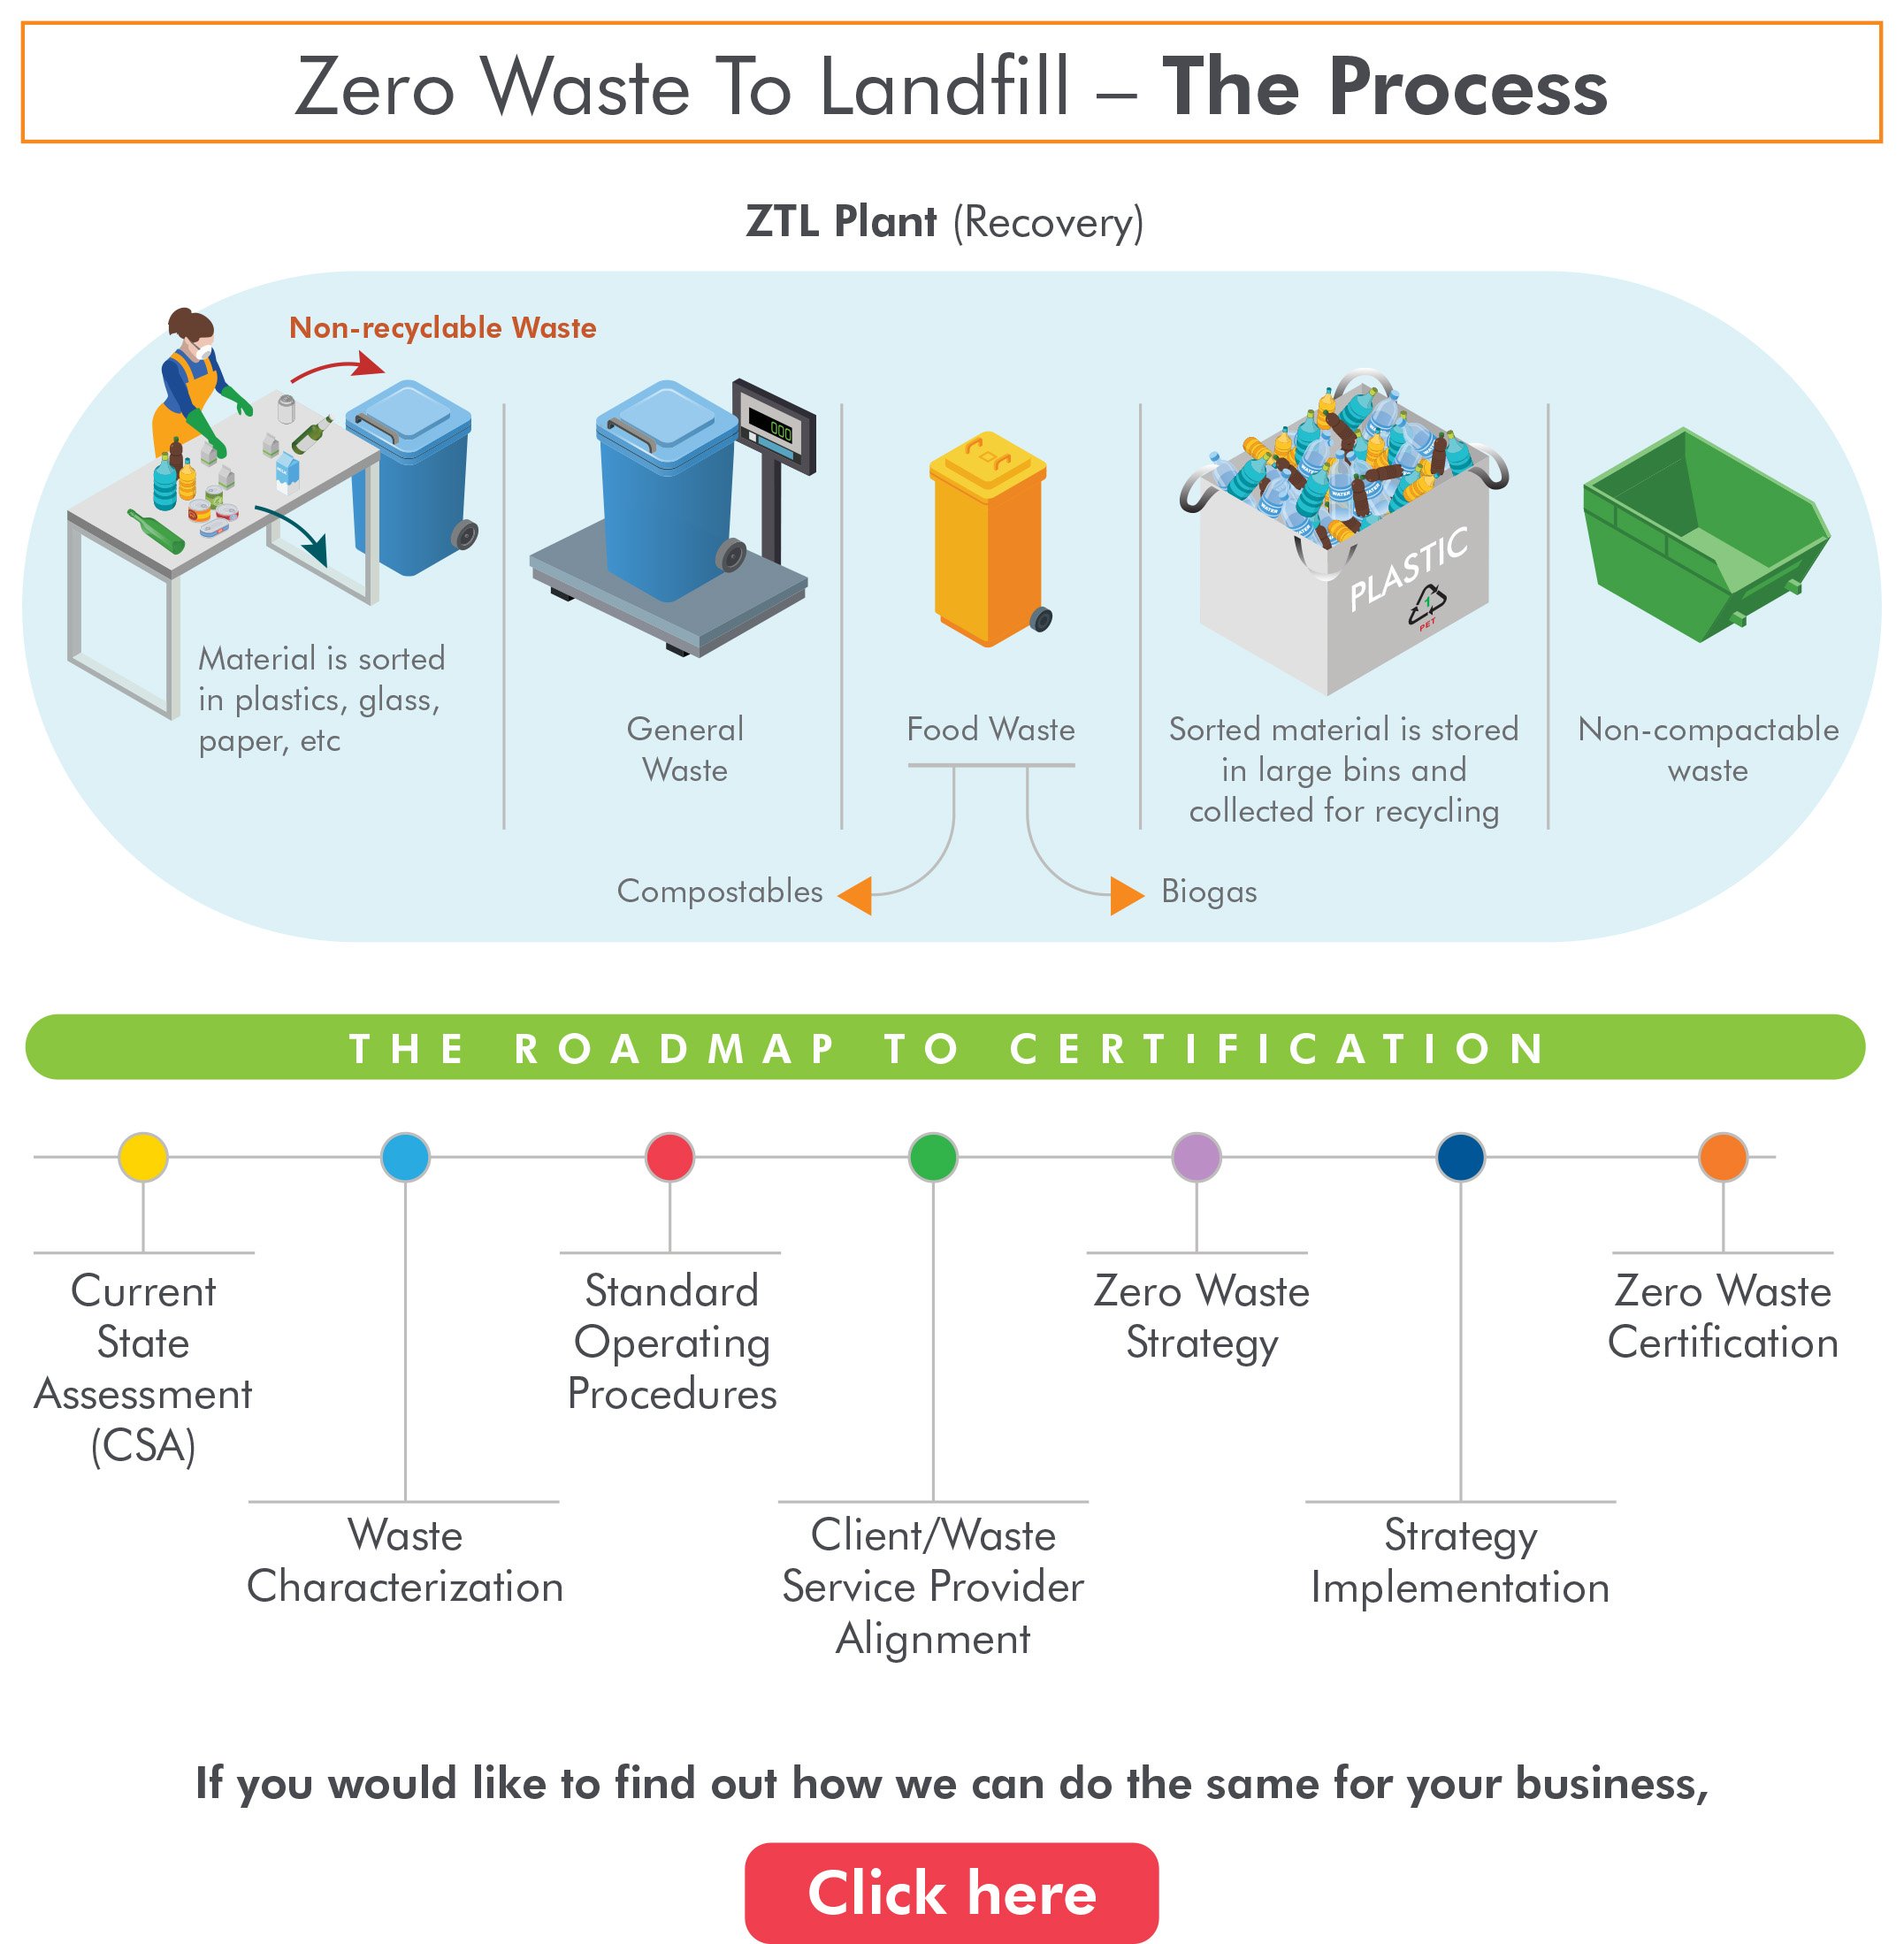 The process of Zero waste to landfill